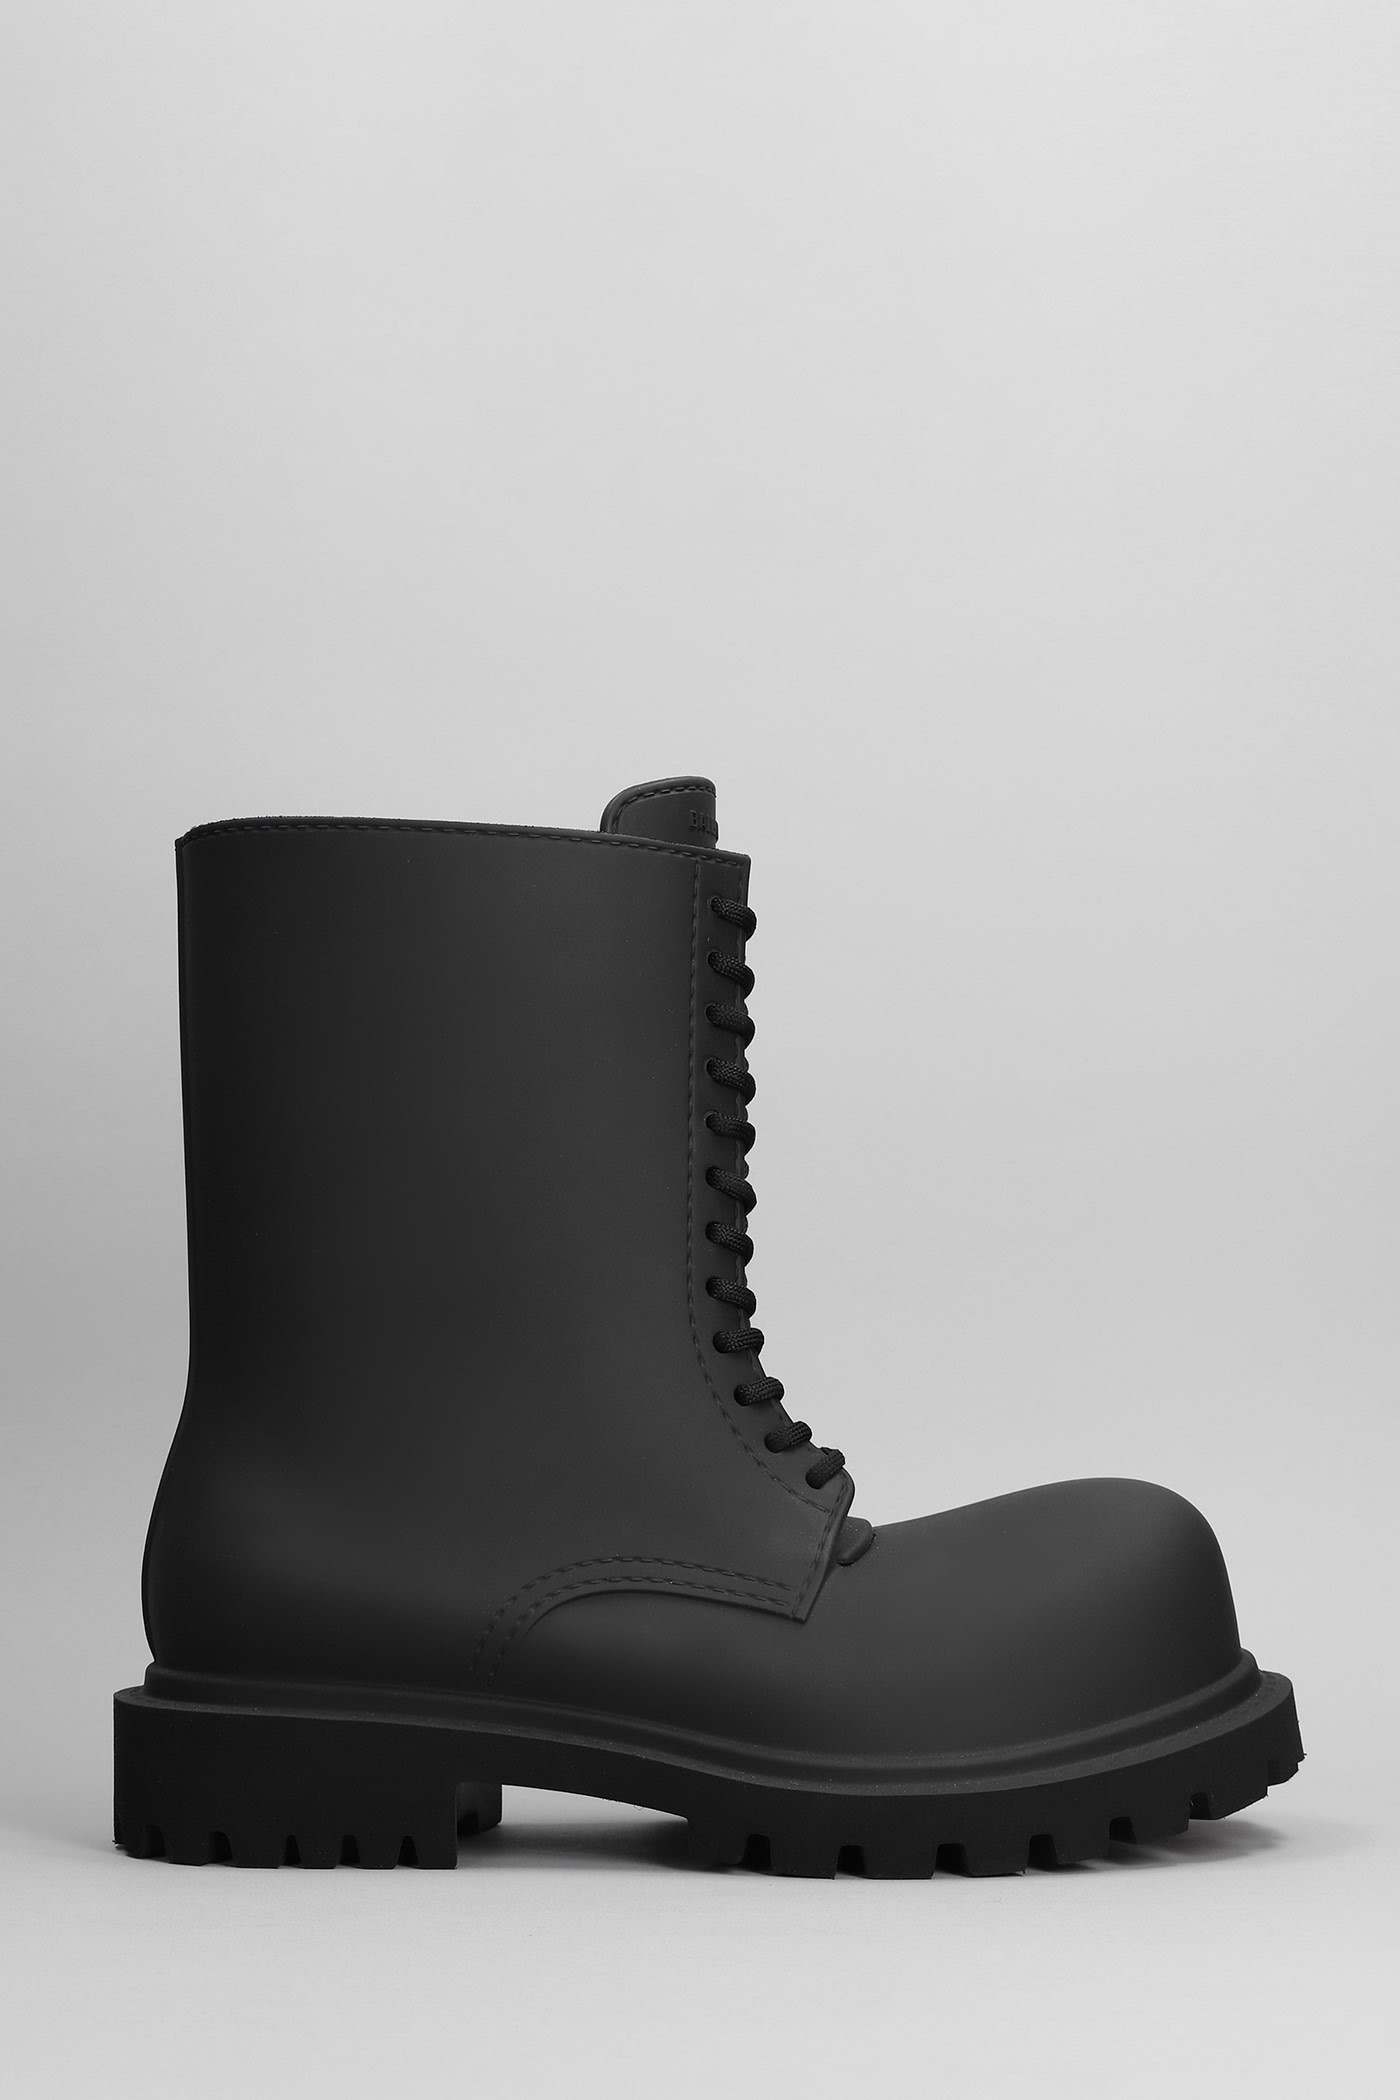 Steroid Boot Combat Boots In Black Eva